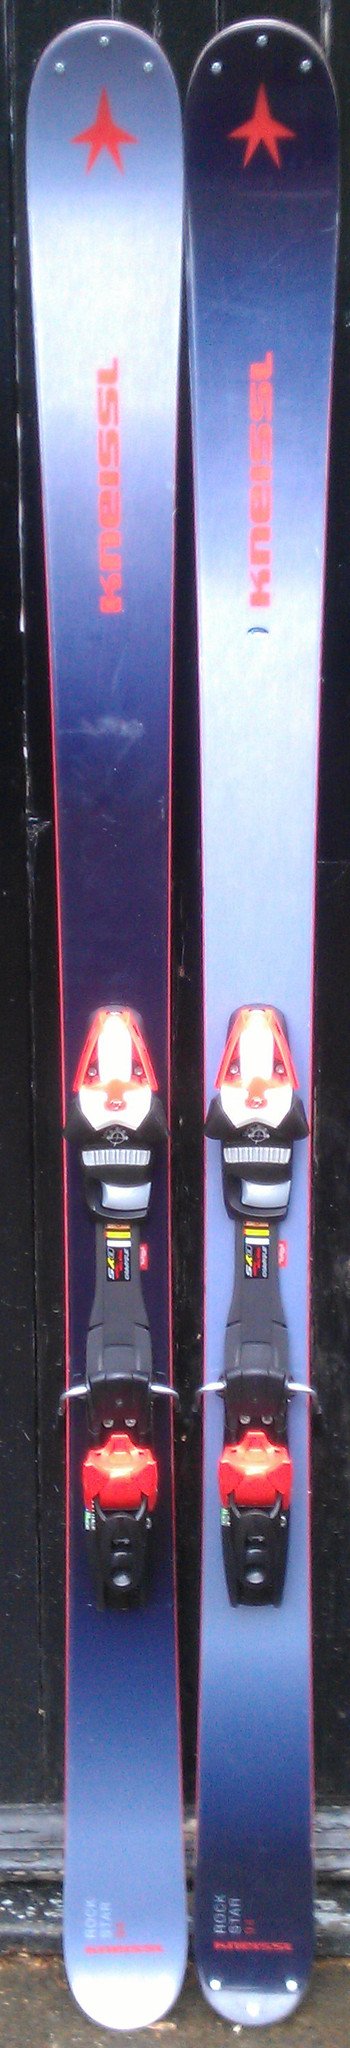 Kneissl Rock Star 179cm - Last 2 Pairs of Brand New Skis with bindings befor New Range!